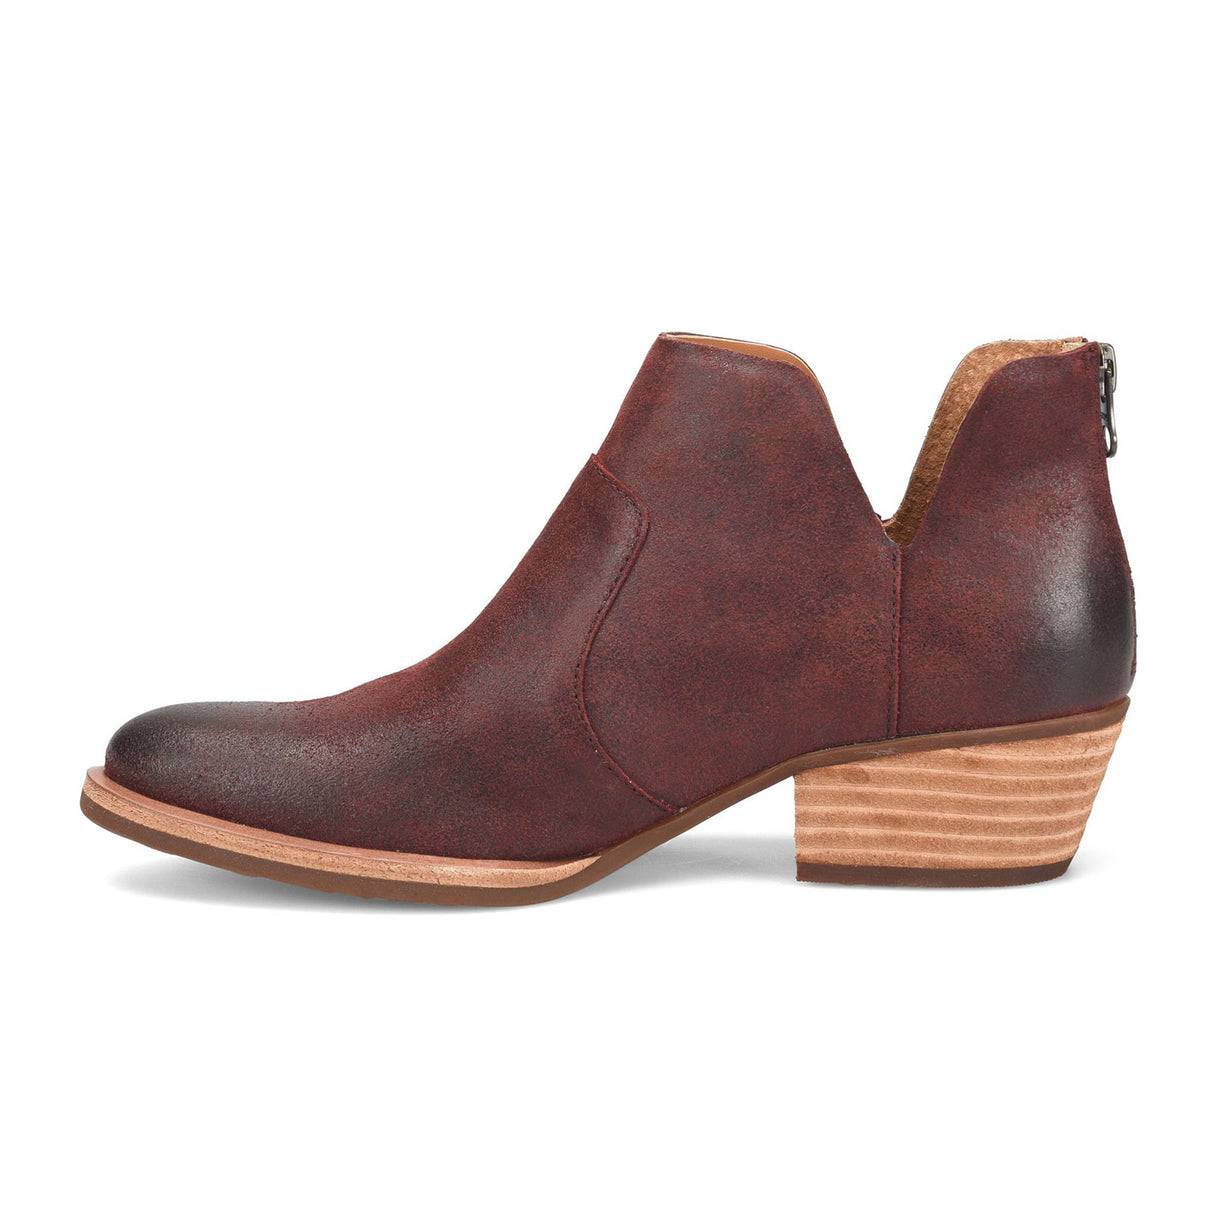 Kork-Ease Skye Heeled Ankle Boot (Women) - Dark Red Boots - Fashion - The Heel Shoe Fitters